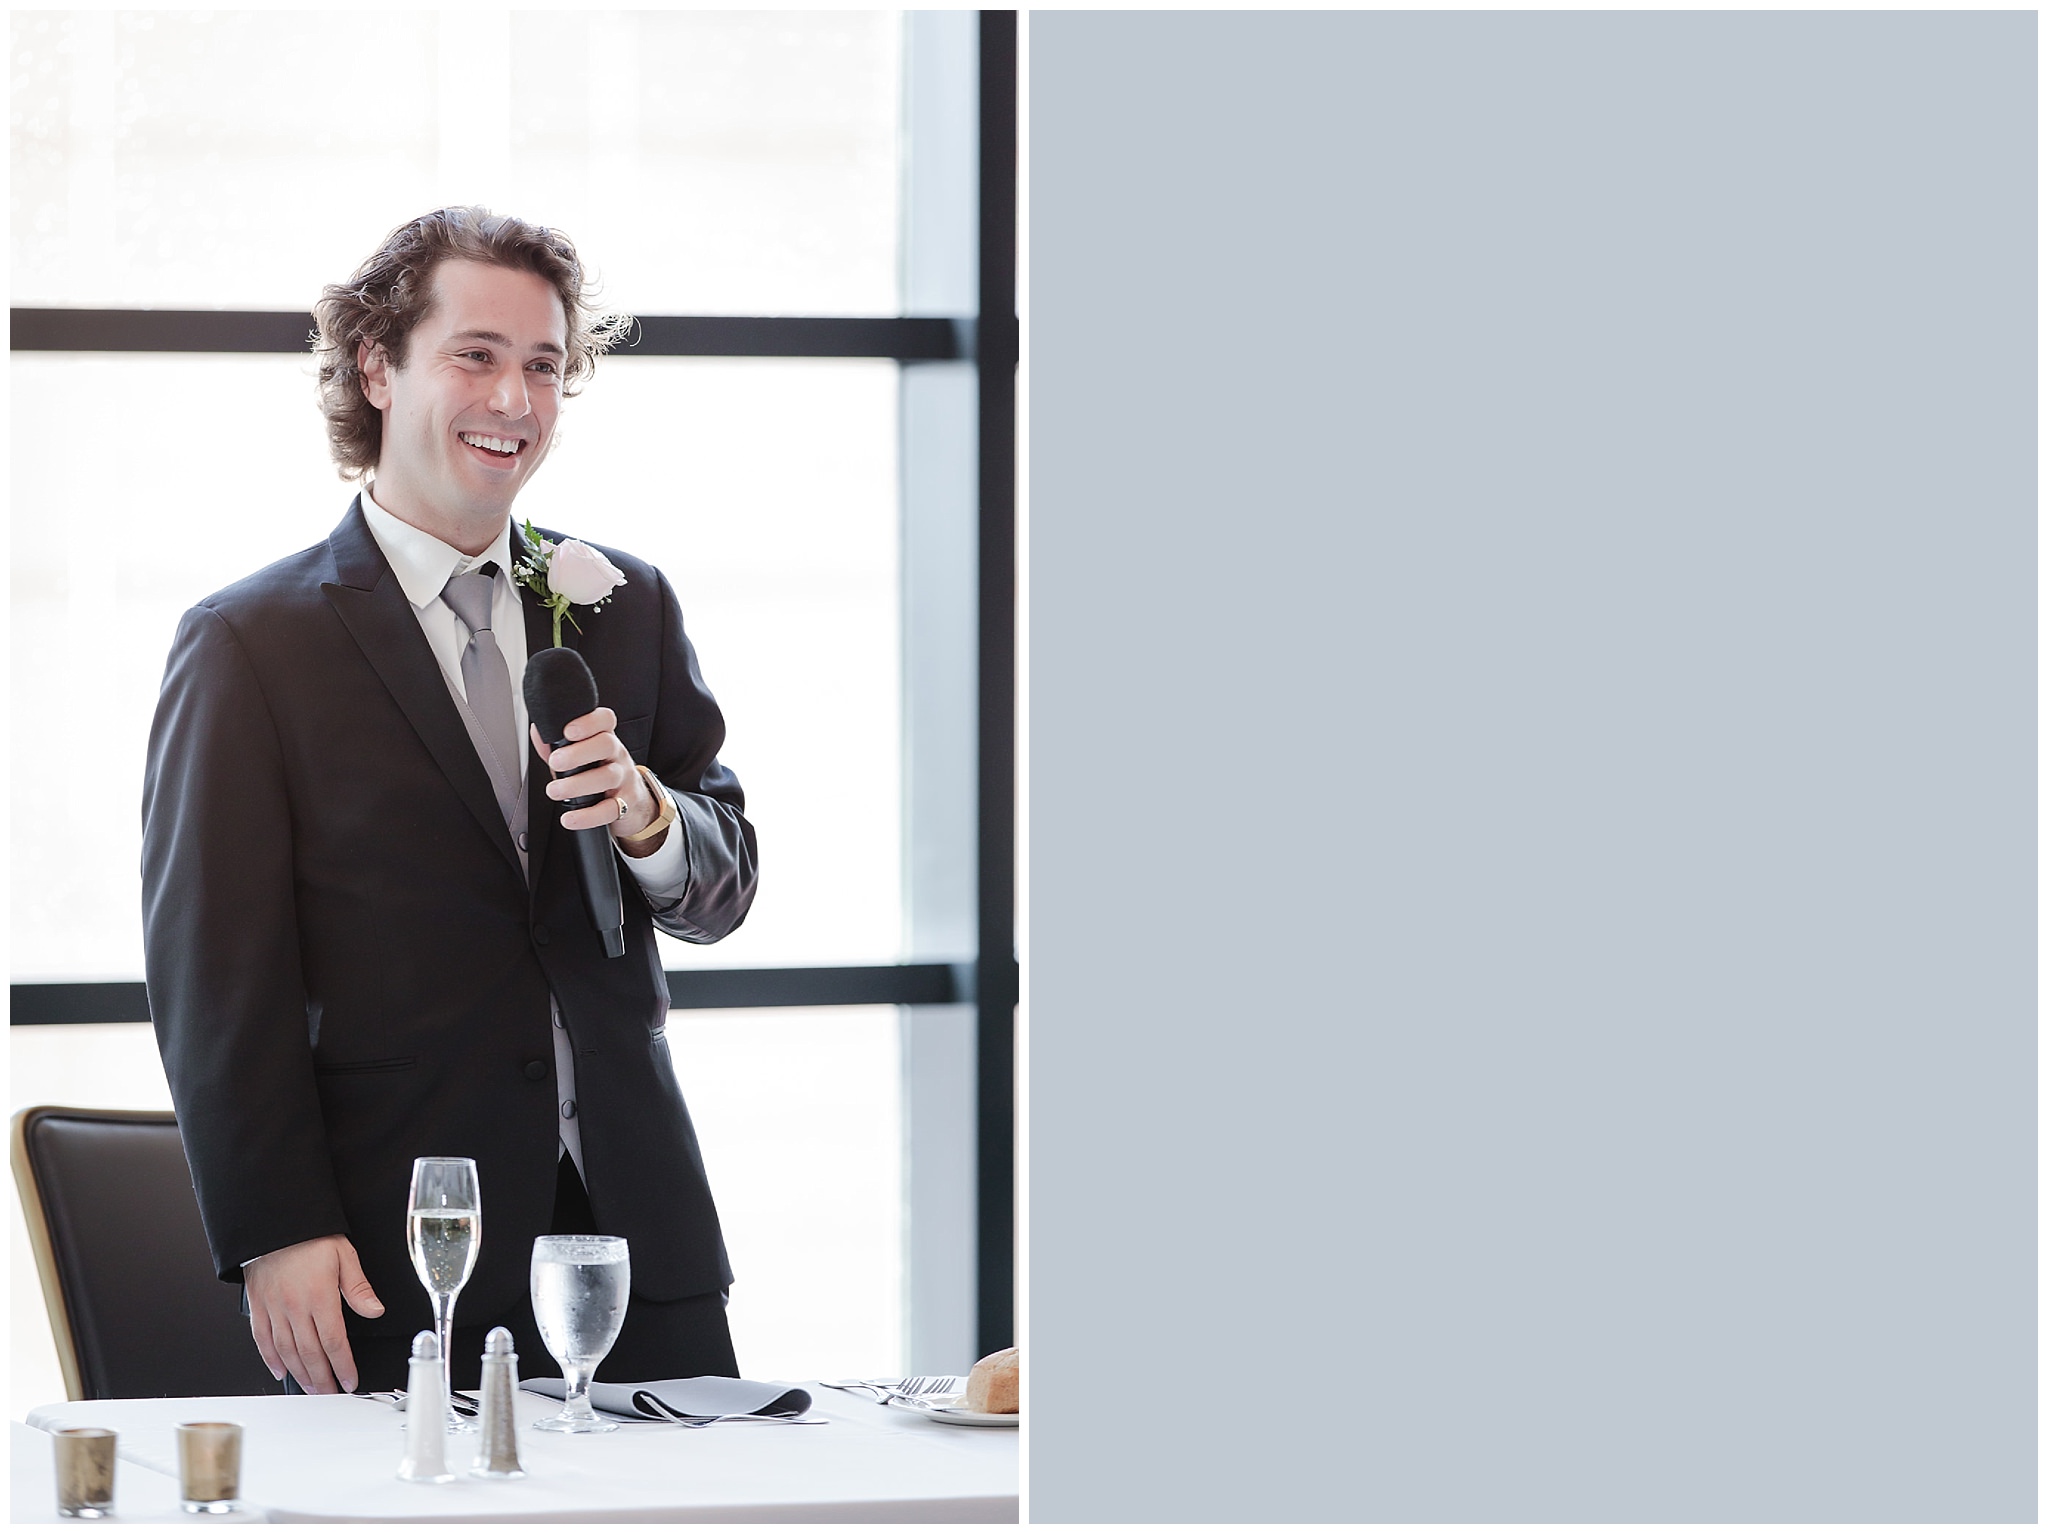 Best man toasts the bride & groom at Duquesne University